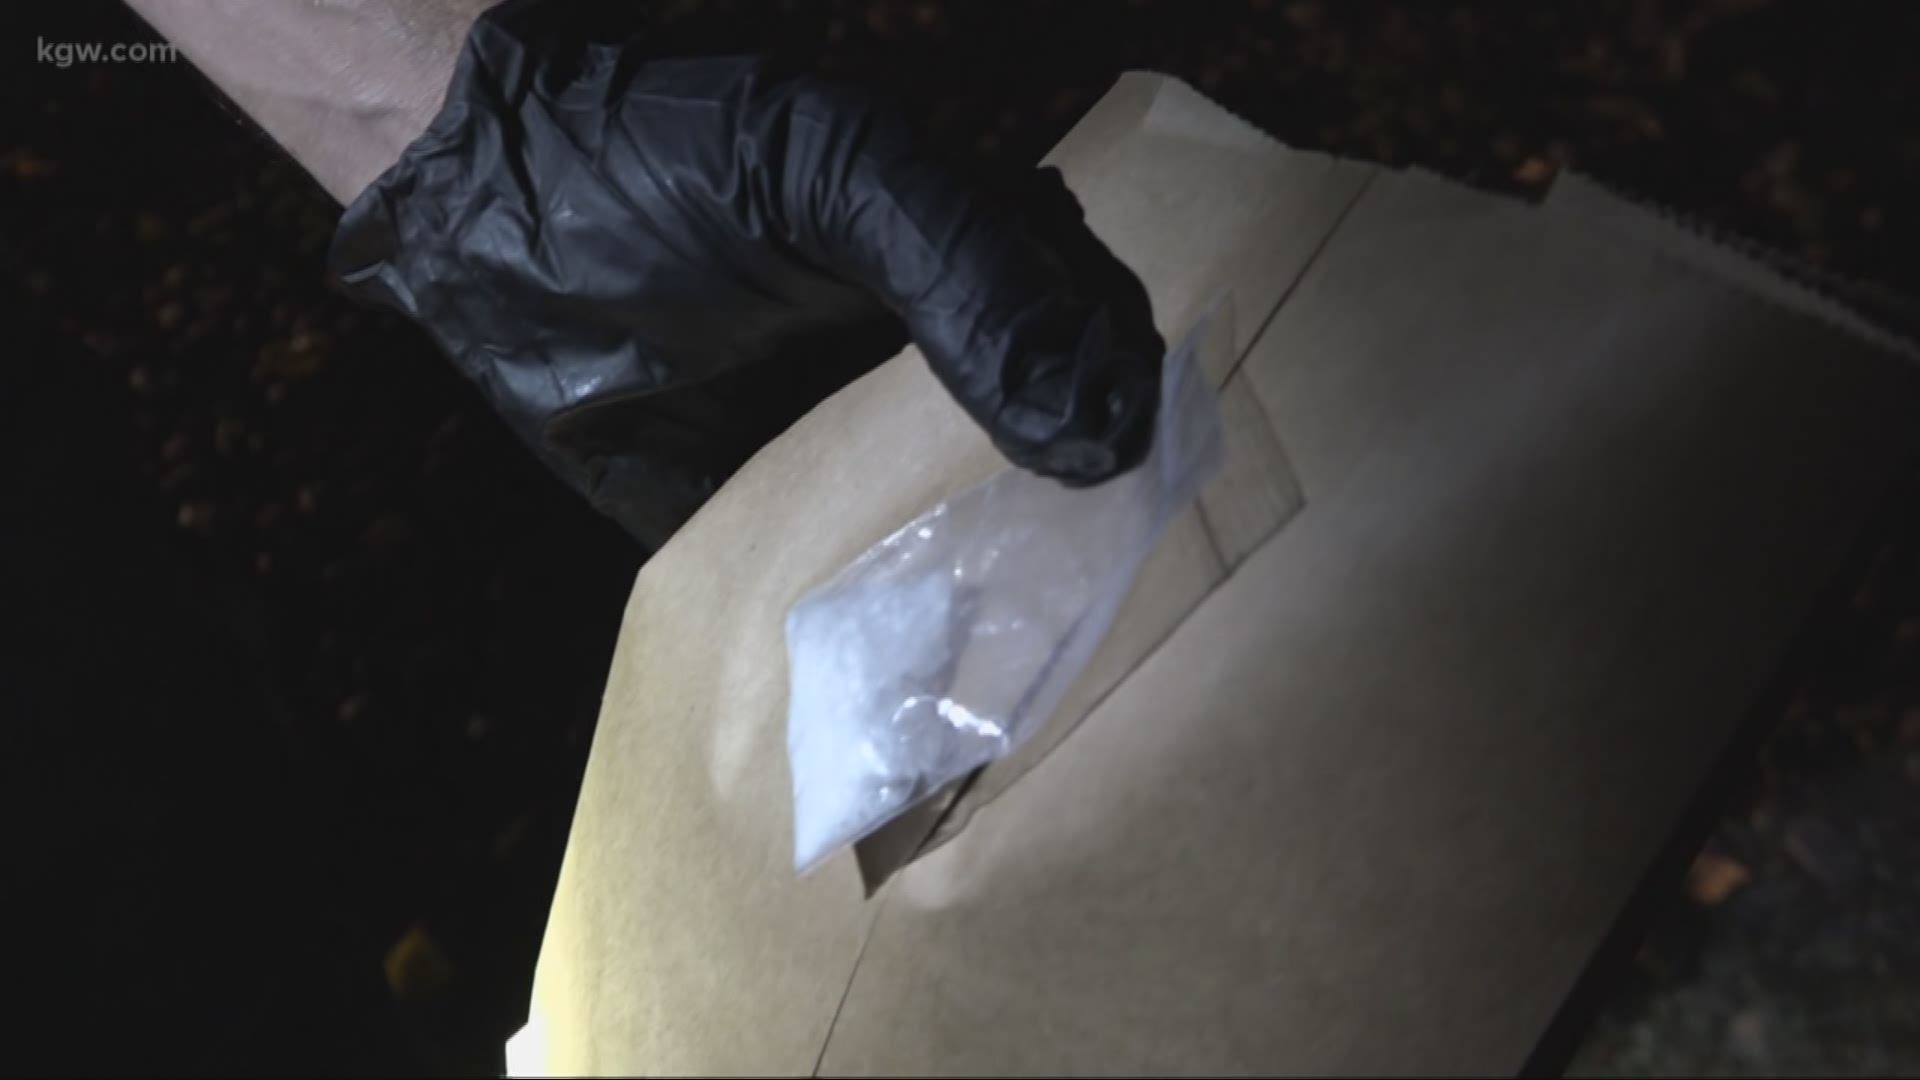 There’s been a surge in meth-related deaths in Oregon.